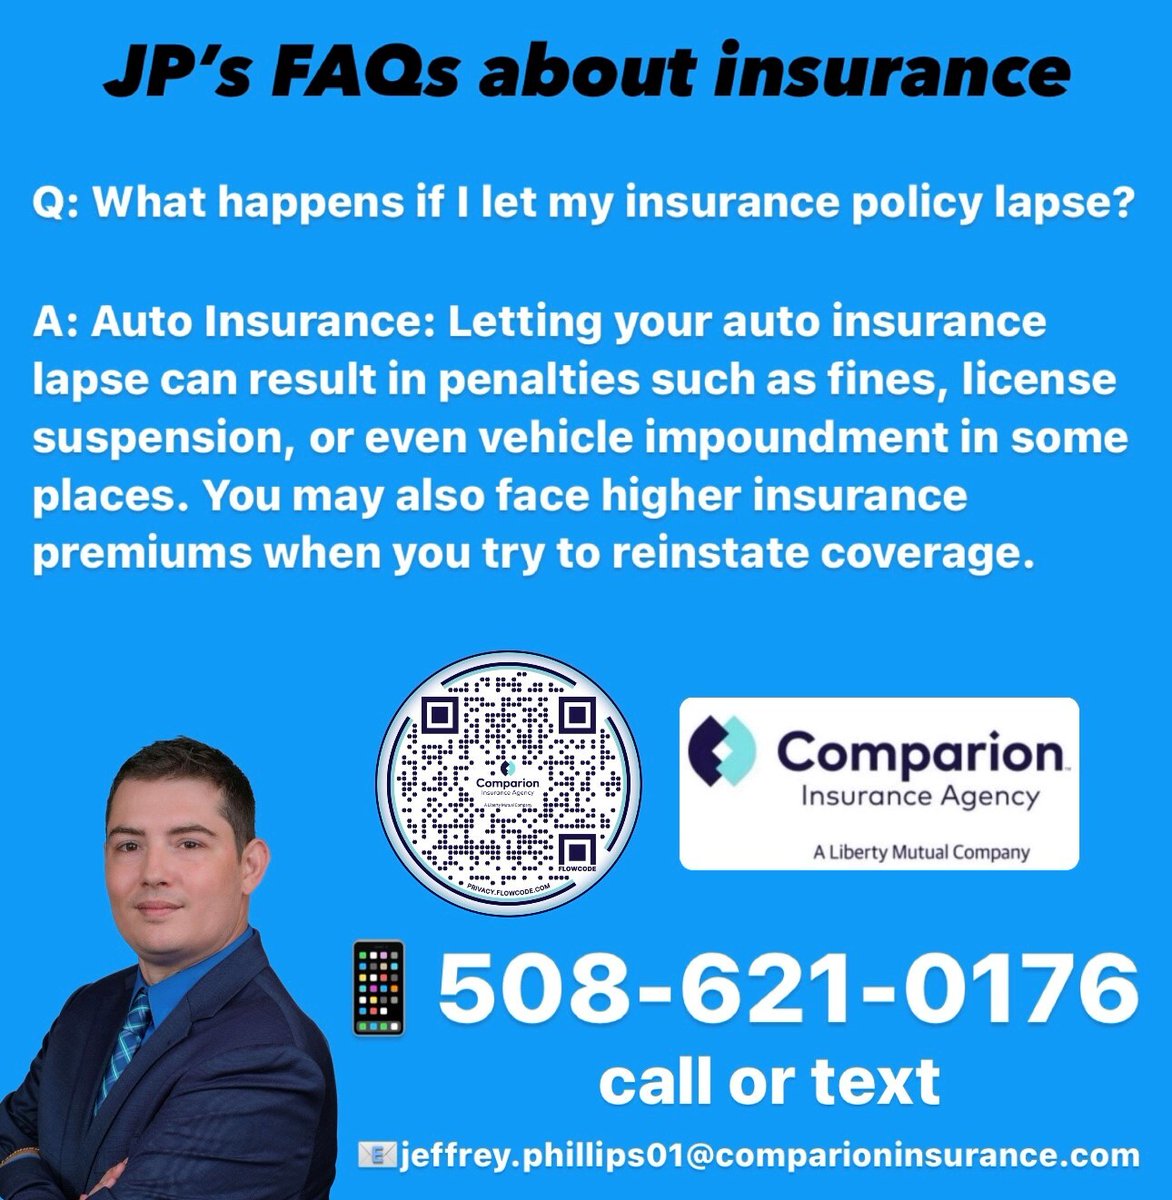 JP's FAQs about insurance I am always here for you when you need me 📲 508-621-0176 📧 jeffrey.phillips01@comparioninsurance.com 💻 bit.ly/3xVlPdM #herewhenyouneedme #localagent #comparioninsurance #trust #inyourcorner #hereforyou